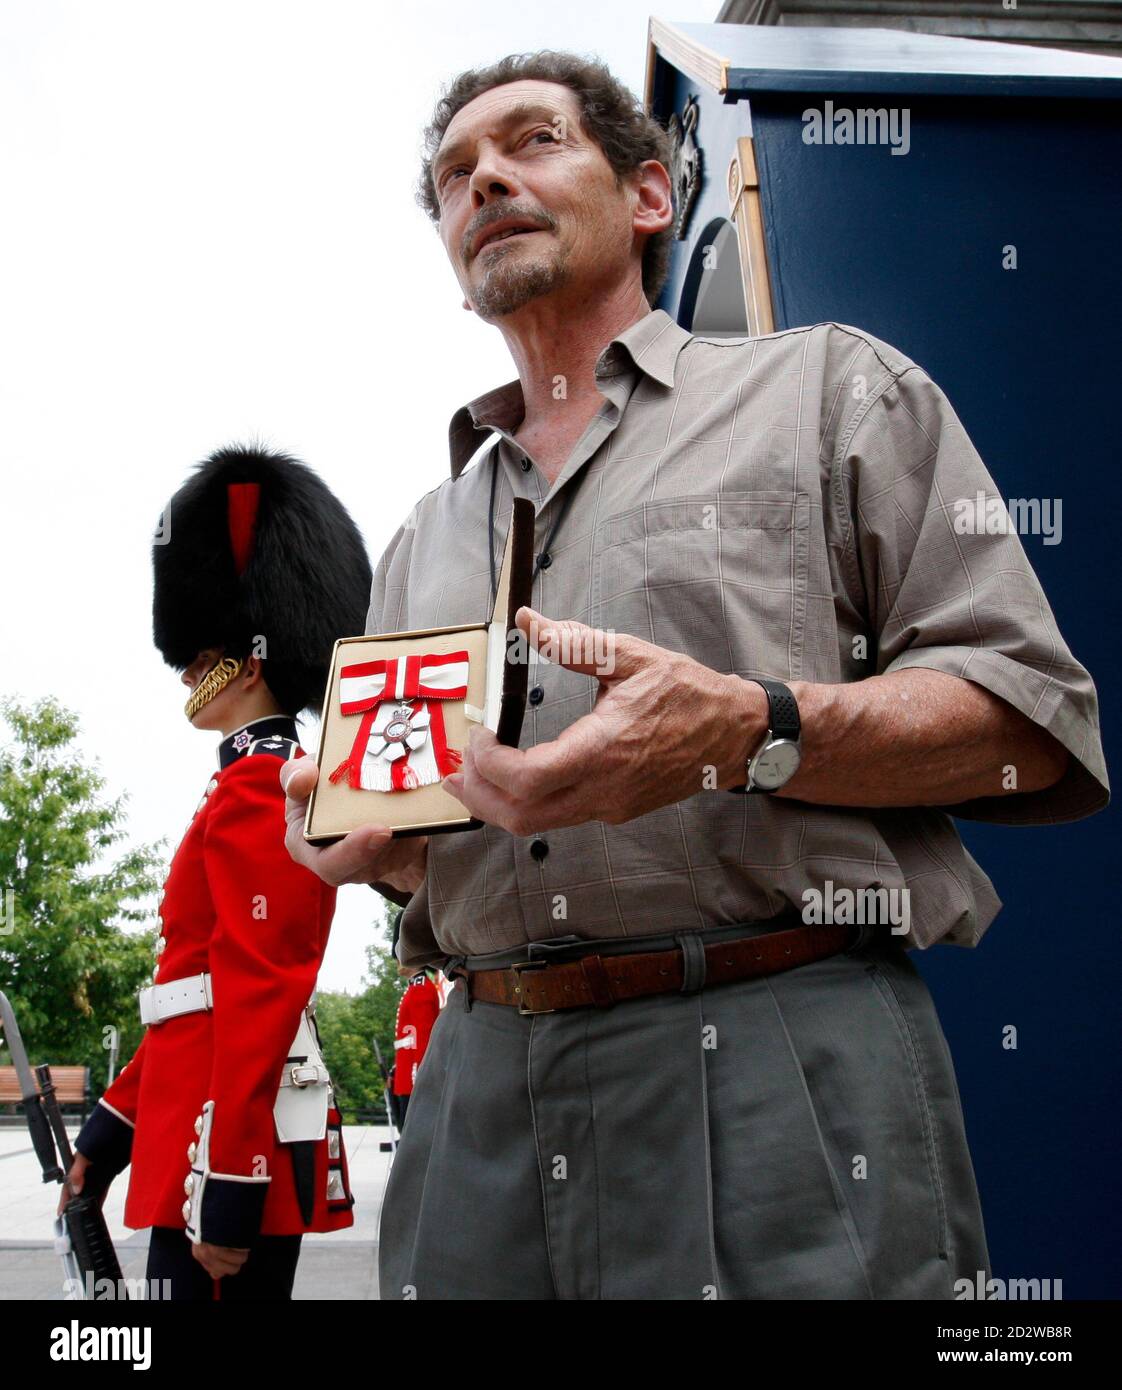 Mark Schlingerman, a director general of the Catholic group Madonna House, holds an Order of Canada medal that was awarded to the group's late founder, Catherine Doherty, outside the front gates of Rideau Hall in Ottawa July 8, 2008. The group returned the medal to protest the naming of Henry Morgentaler, the doctor who led the fight to legalize abortion in Canada two decades ago, to the country's highest civilian award.       REUTERS/Chris Wattie       (CANADA) Stock Photo